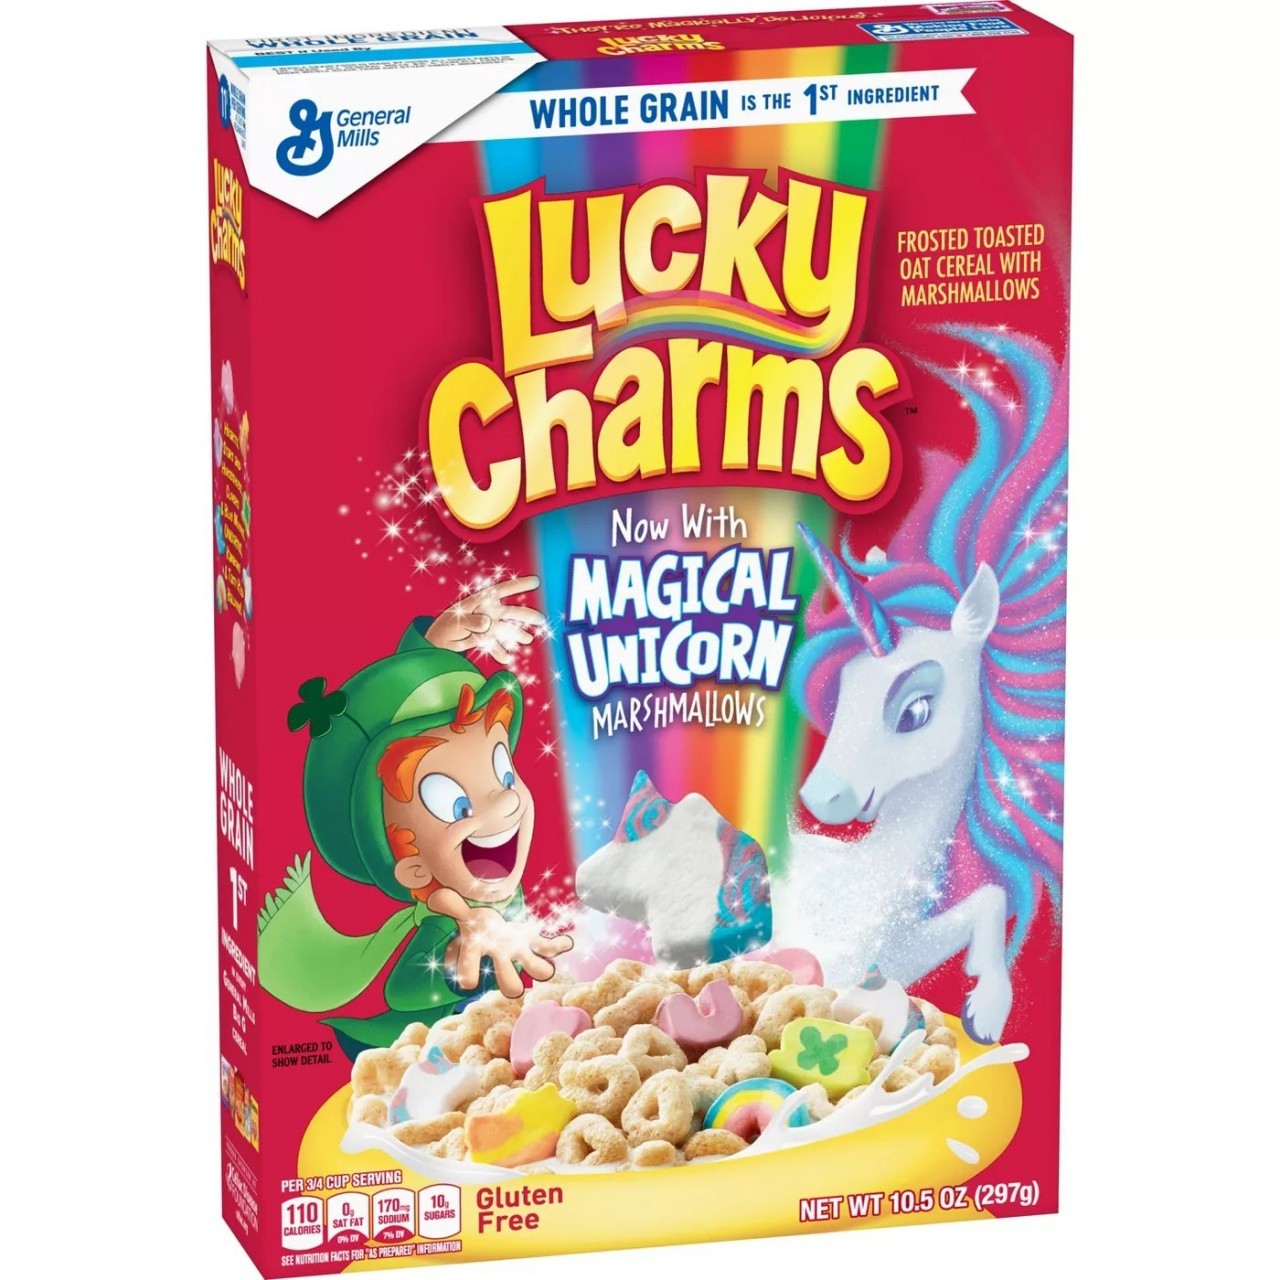 GENERAL MILLS LUCKY CHARMS 297g